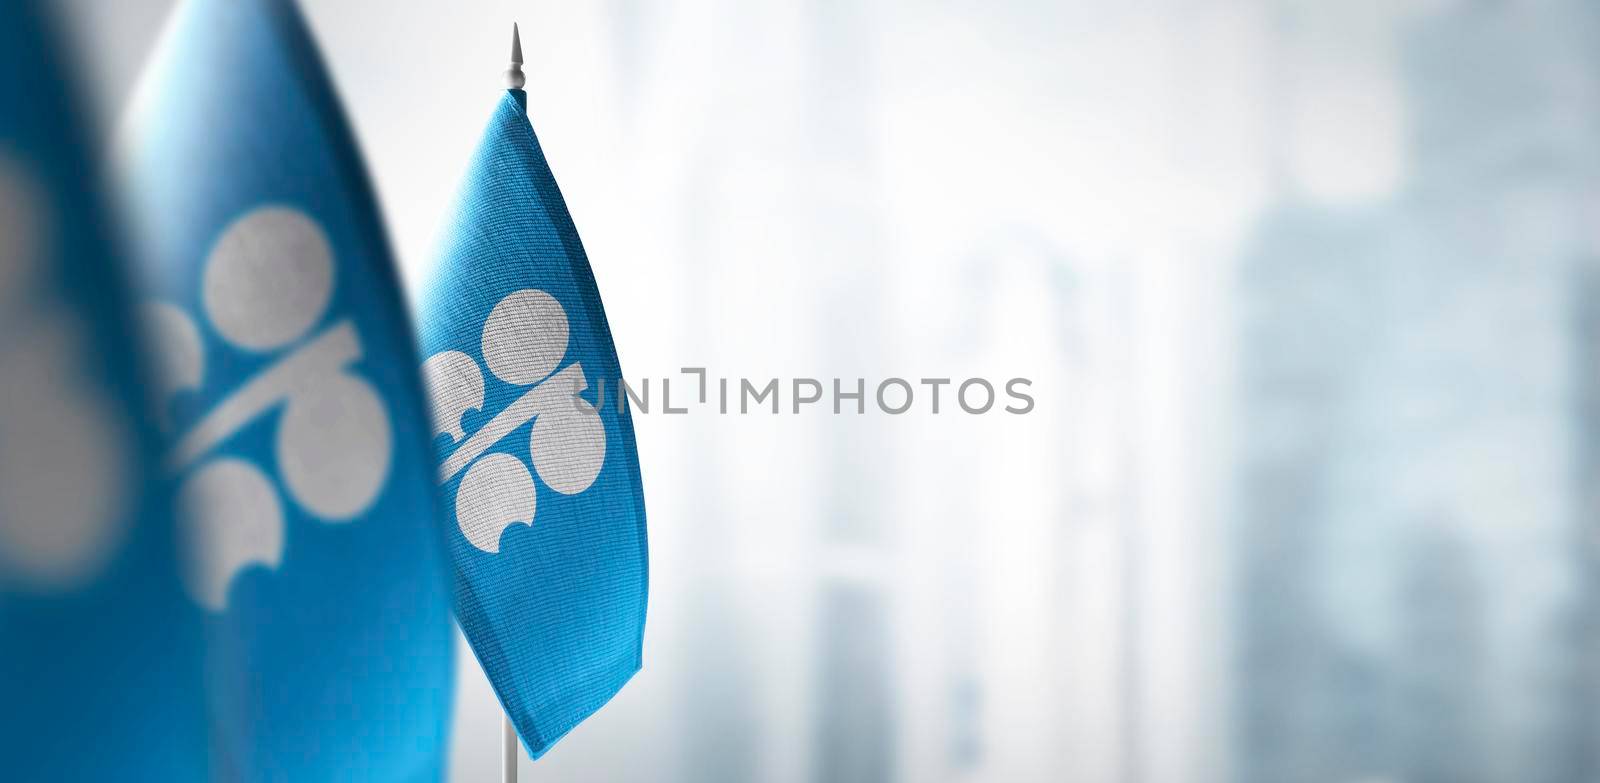 Small flags of Organization of the Petroleum Exporting Countries on a blurry background of the city by butenkow